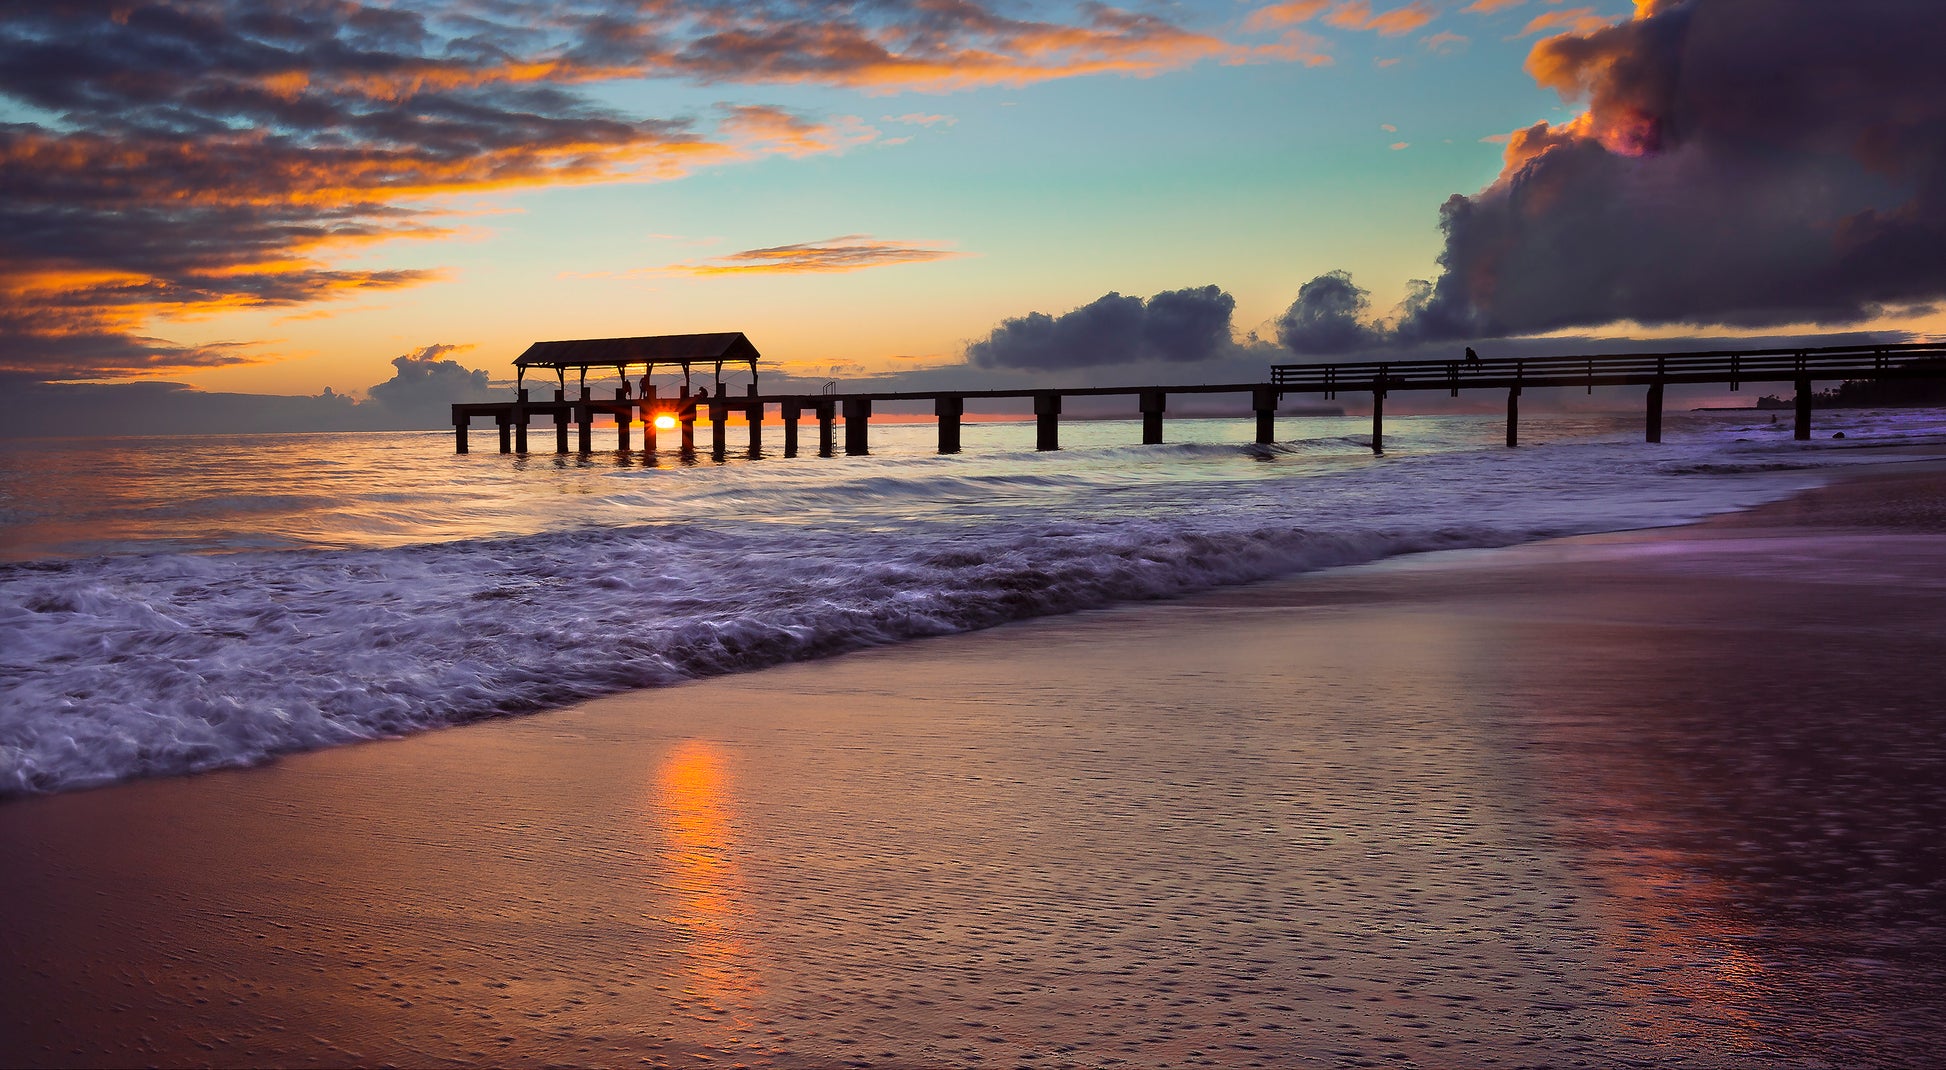 Fine art photograph of Kauai’s Waimea Pier during a brilliant sunset. Outdoor and nature photography by Inspiring Images Hawaii.